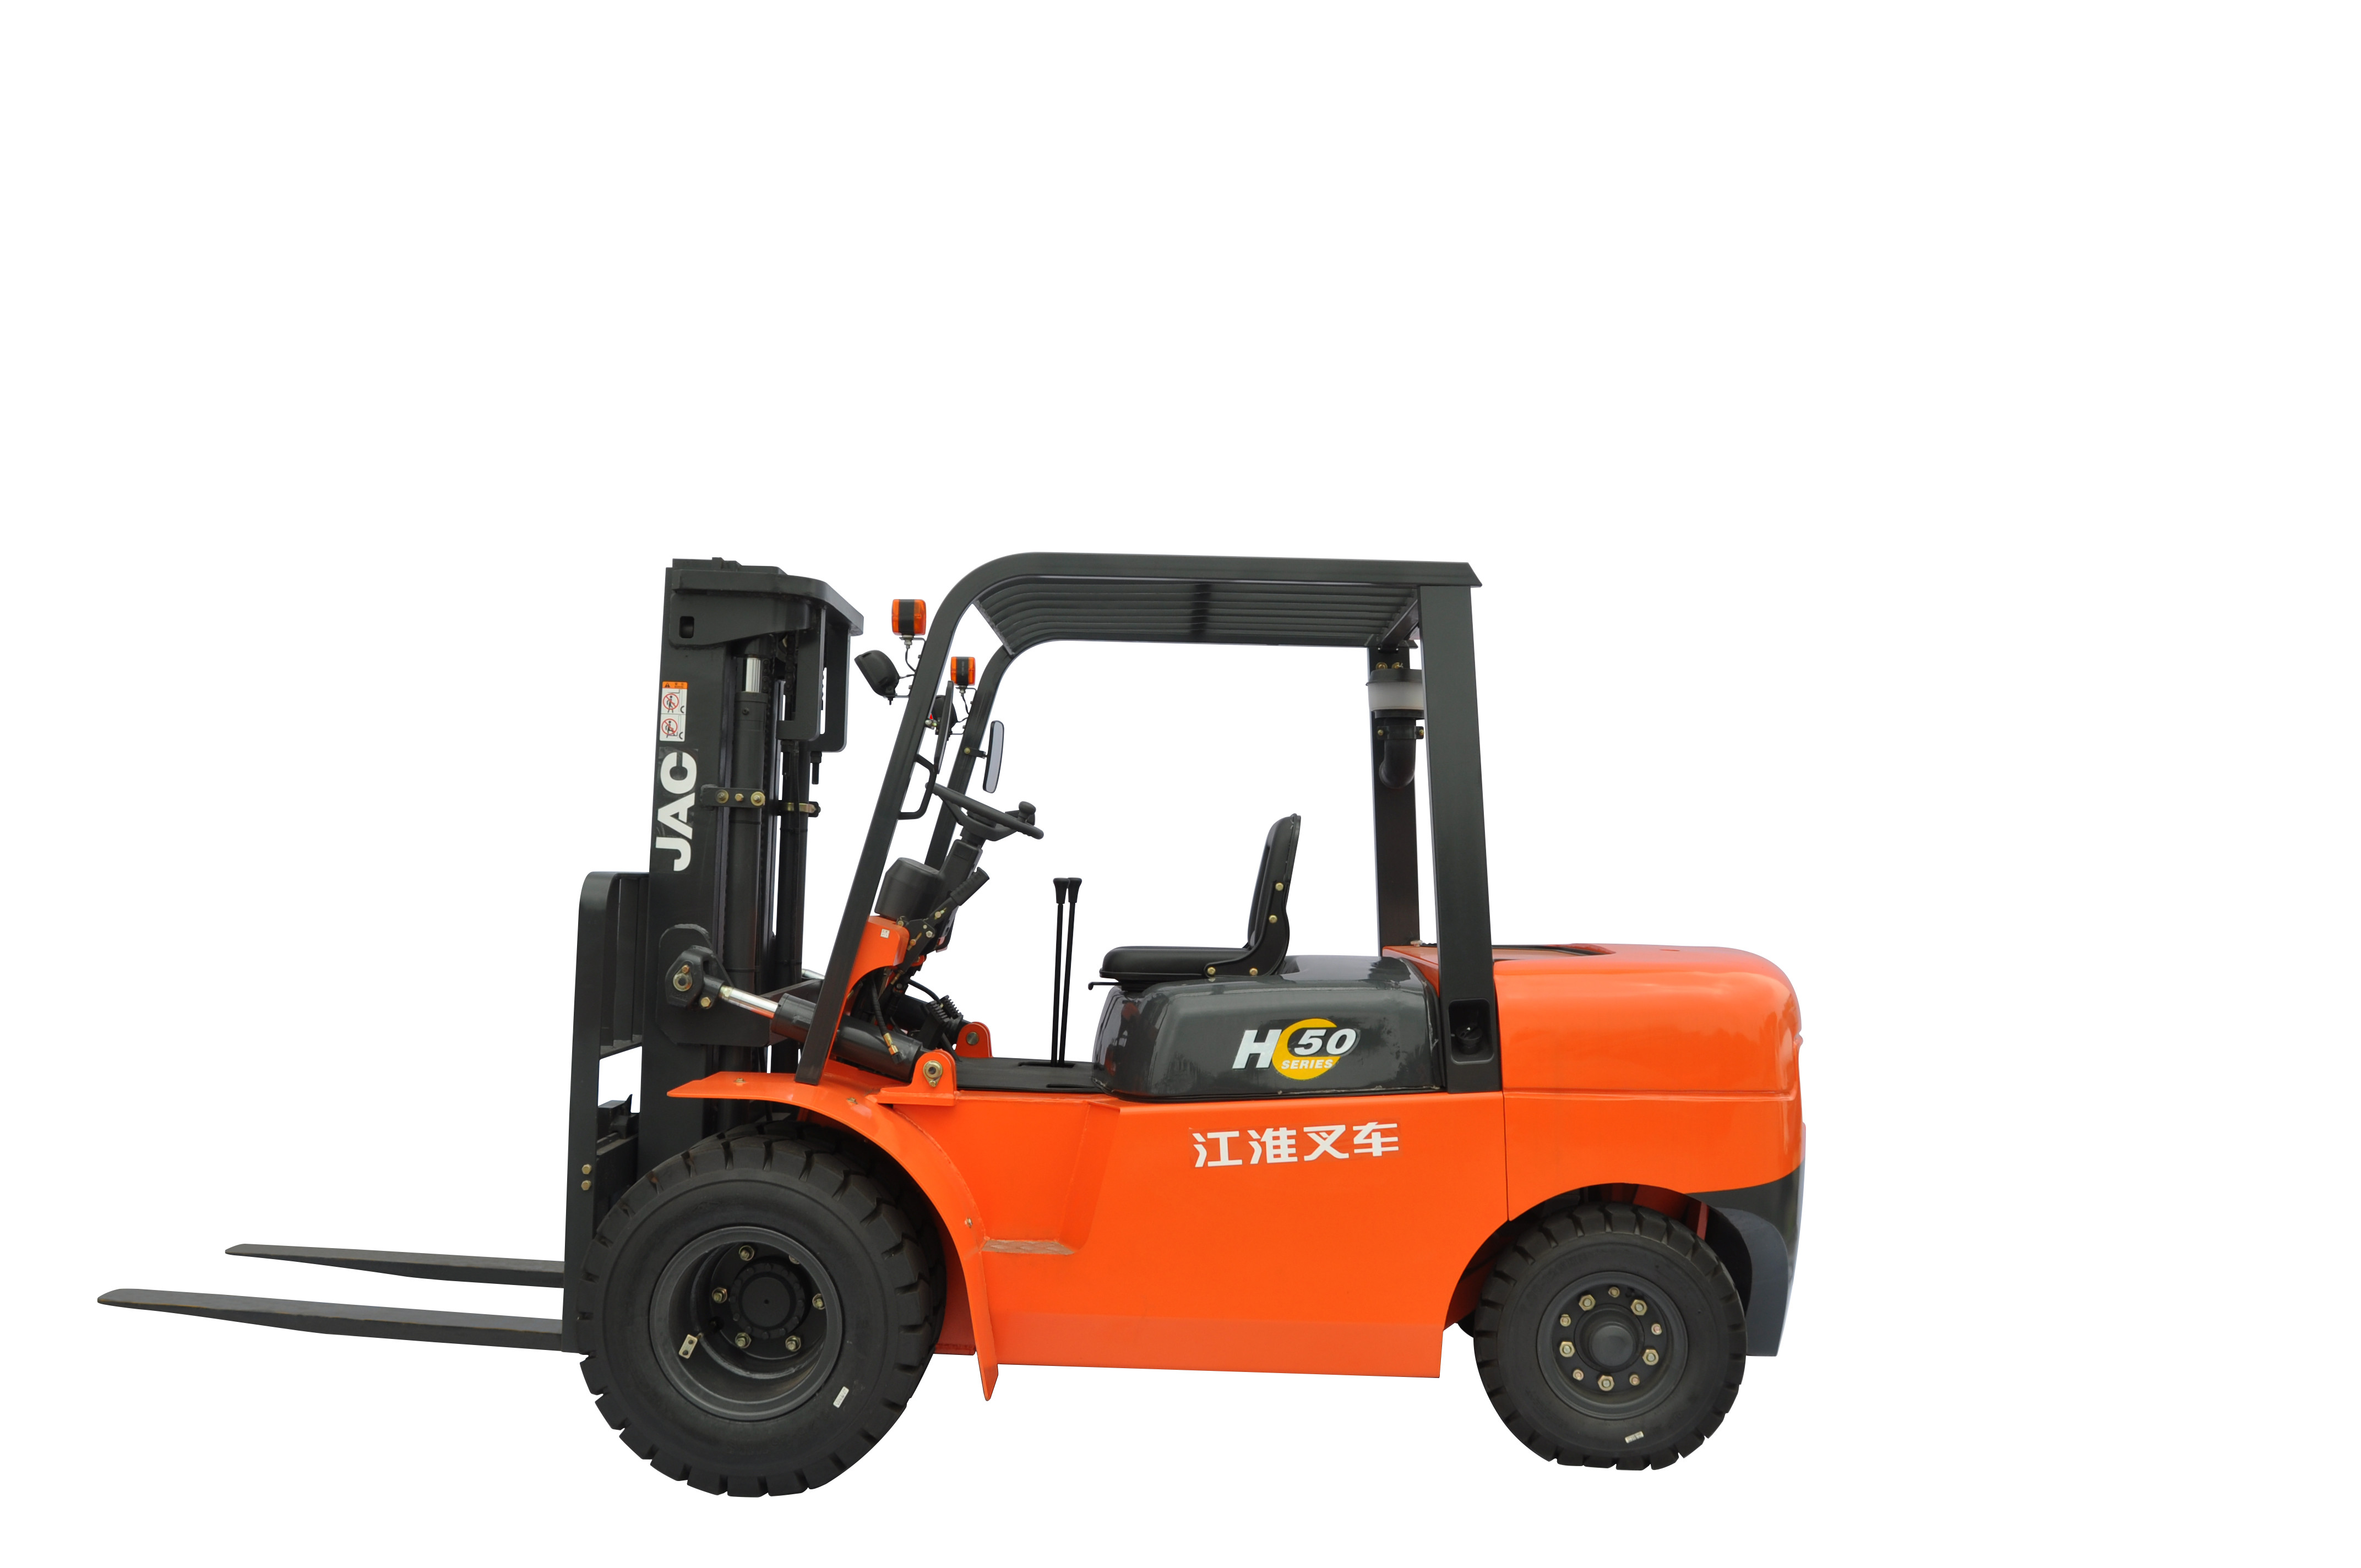 Best Durable Warehouse Lifting Equipment 5 Ton Diesel Forklift With Side Sliding Fork wholesale